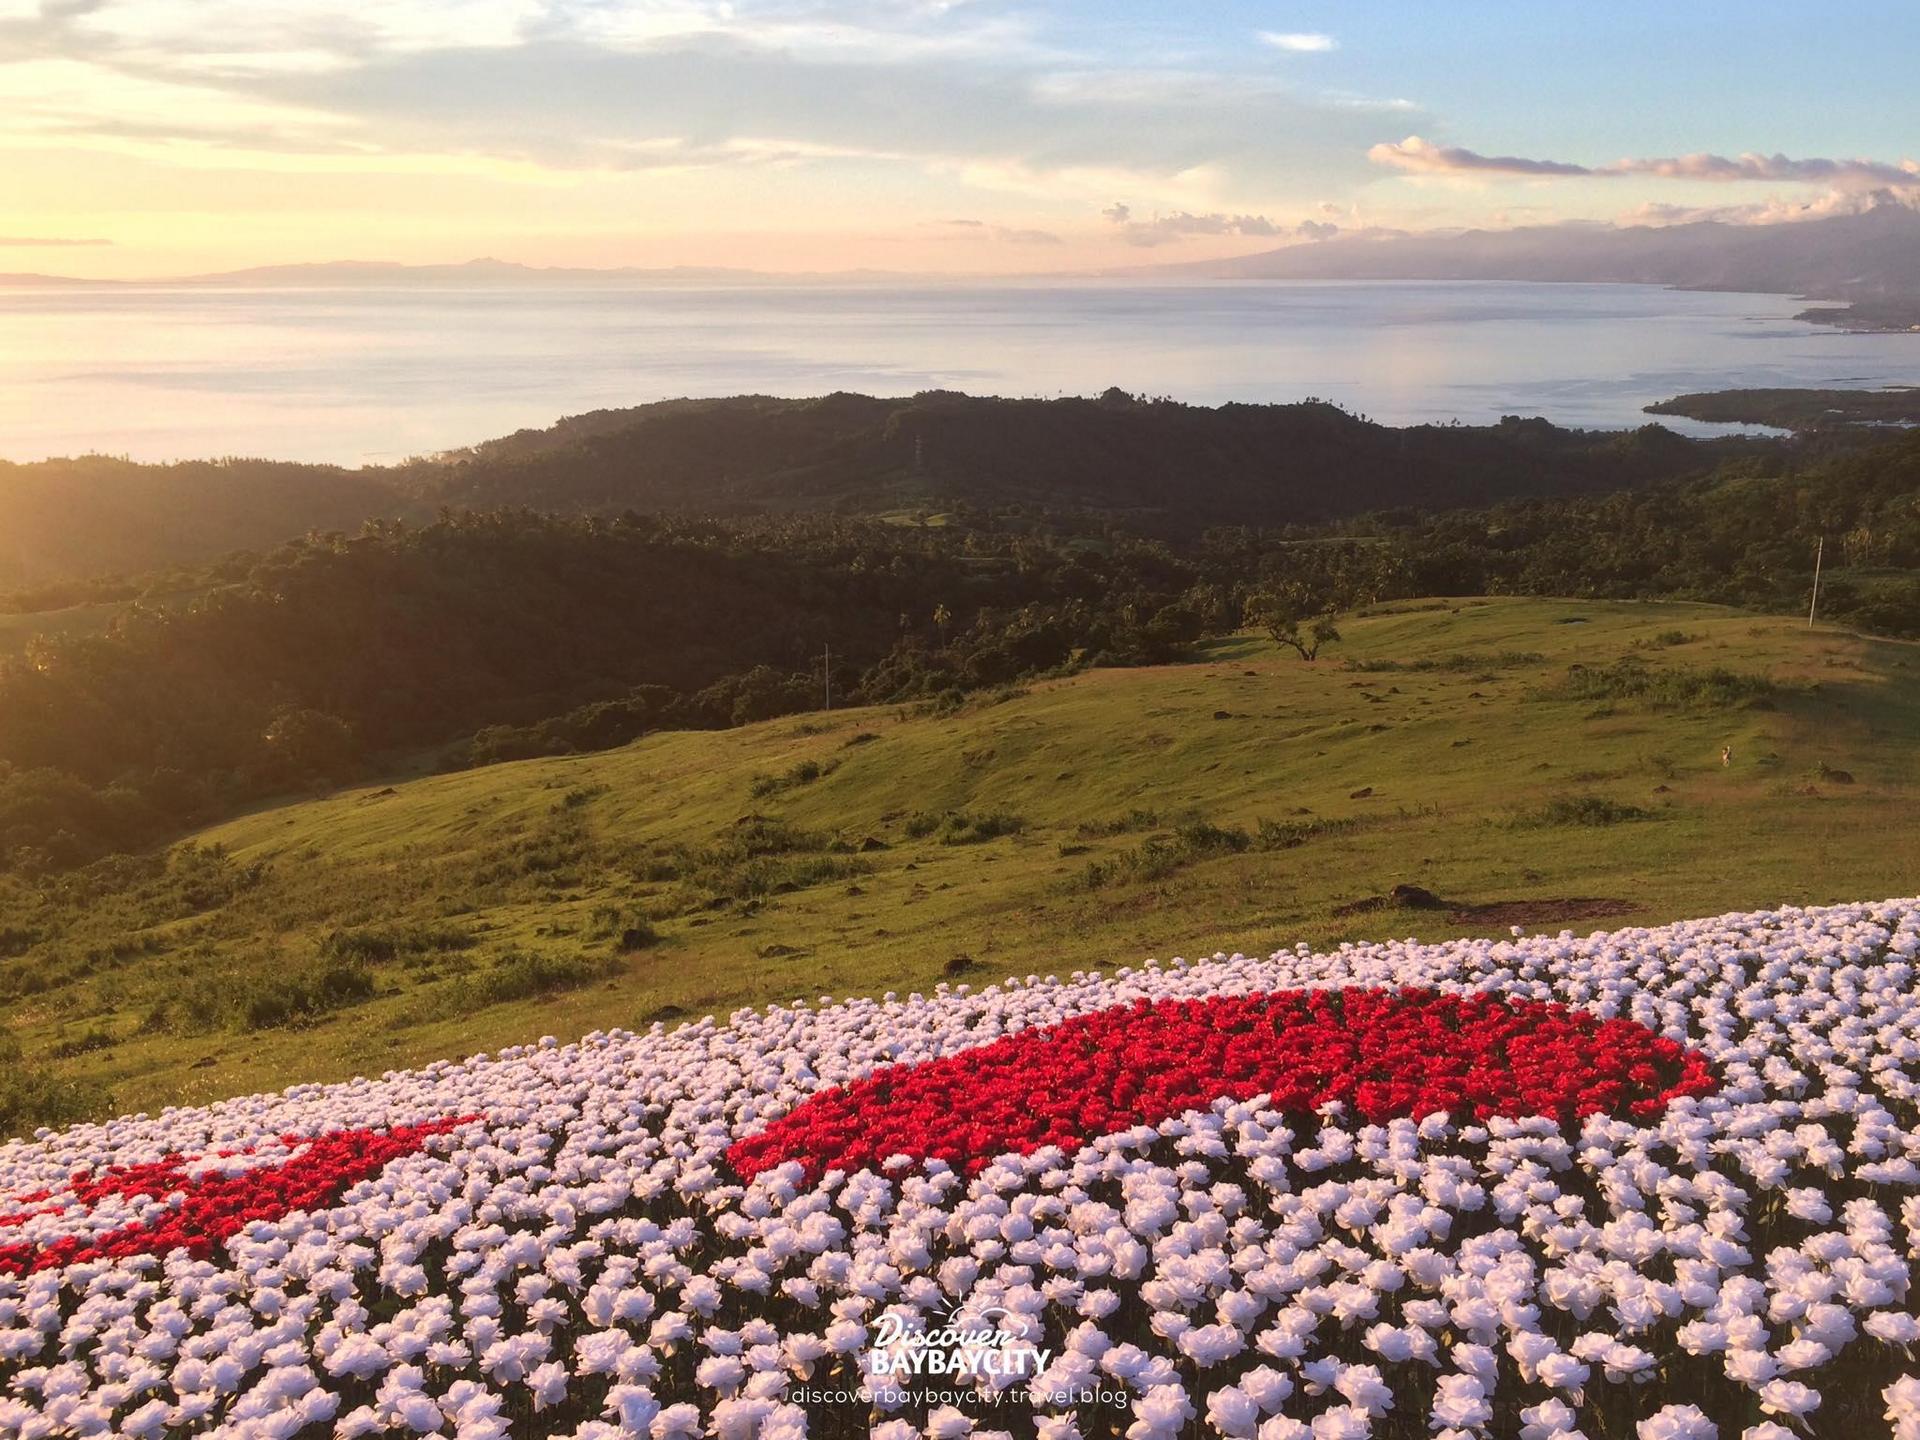 On top of a hill overlooking Camotes Sea, BayBay City’s newest attraction entices tourists with 16,000 LED roses. PHOTO: Facebook/Discover Baybay City